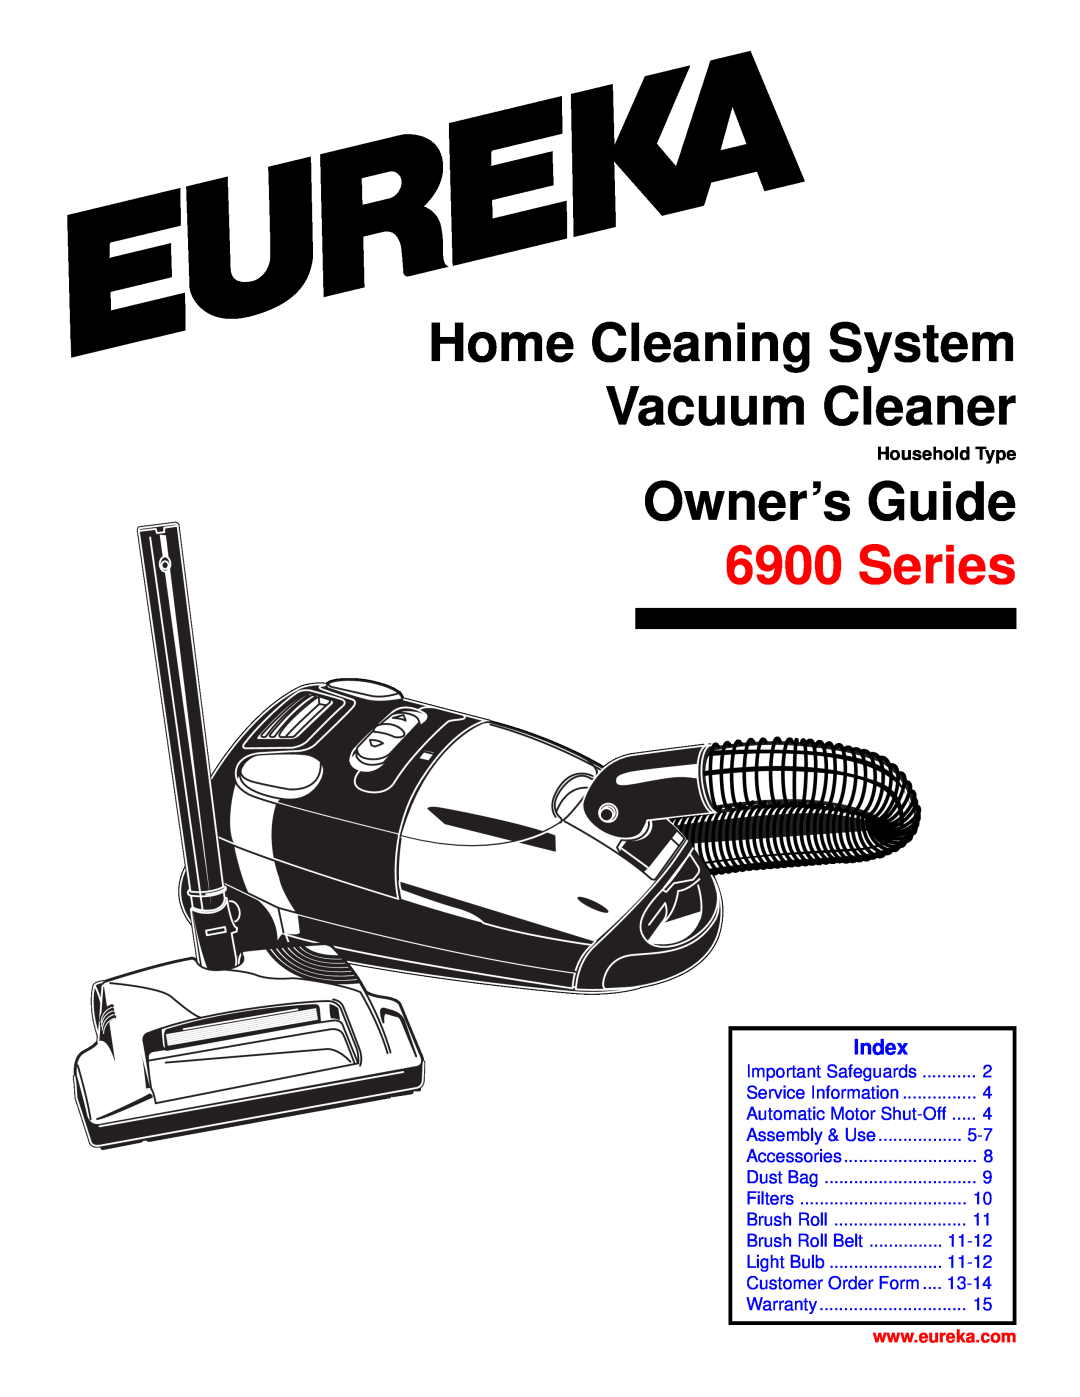 Eureka 6900 warranty Home Cleaning System Vacuum Cleaner, Owner’s Guide, Series, Index, Household Type, Brush Roll Belt 